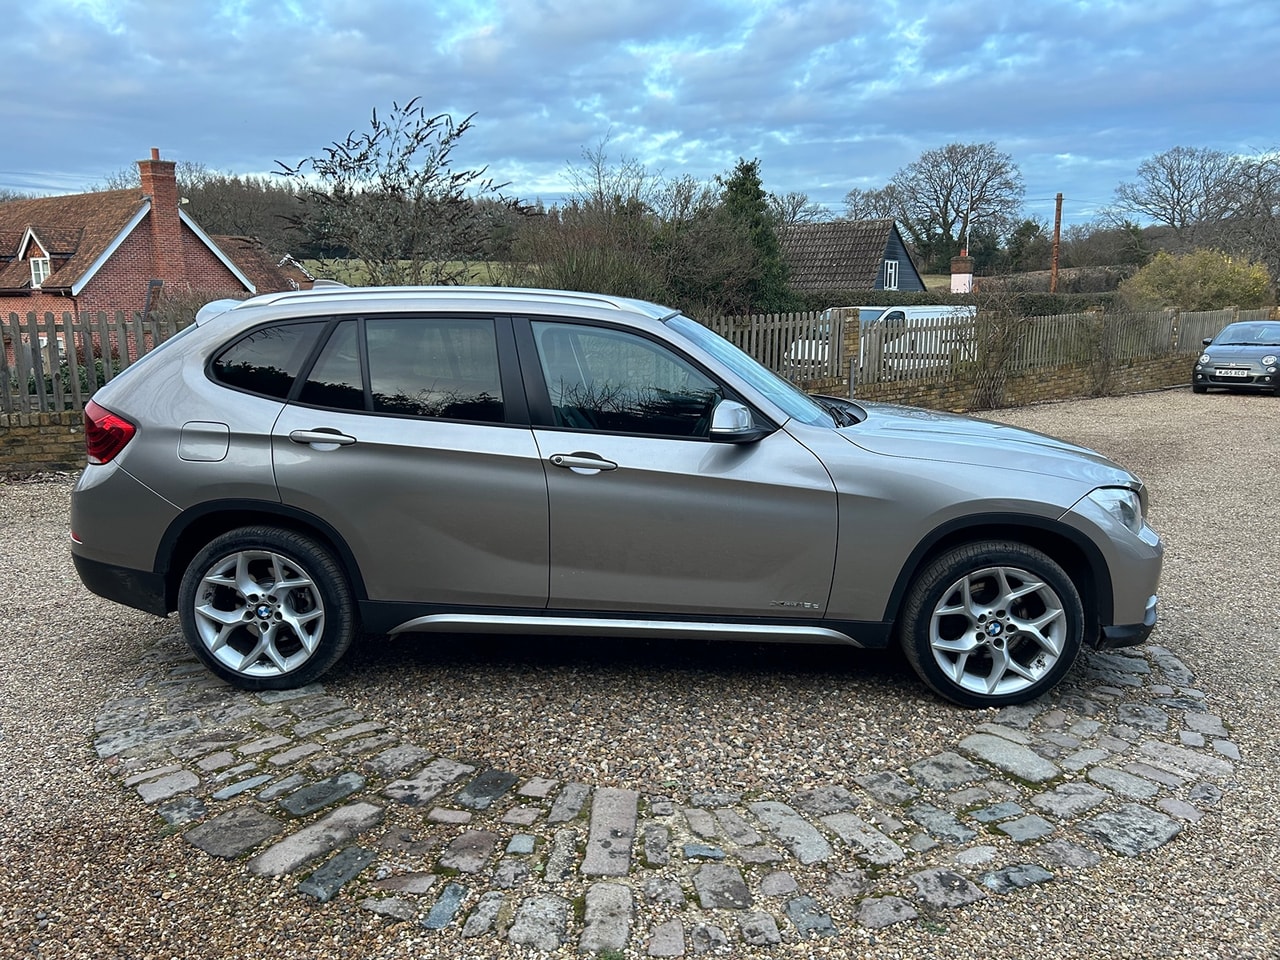 2013 BMW X1 xDrive18d xLine - Picture 5 of 15